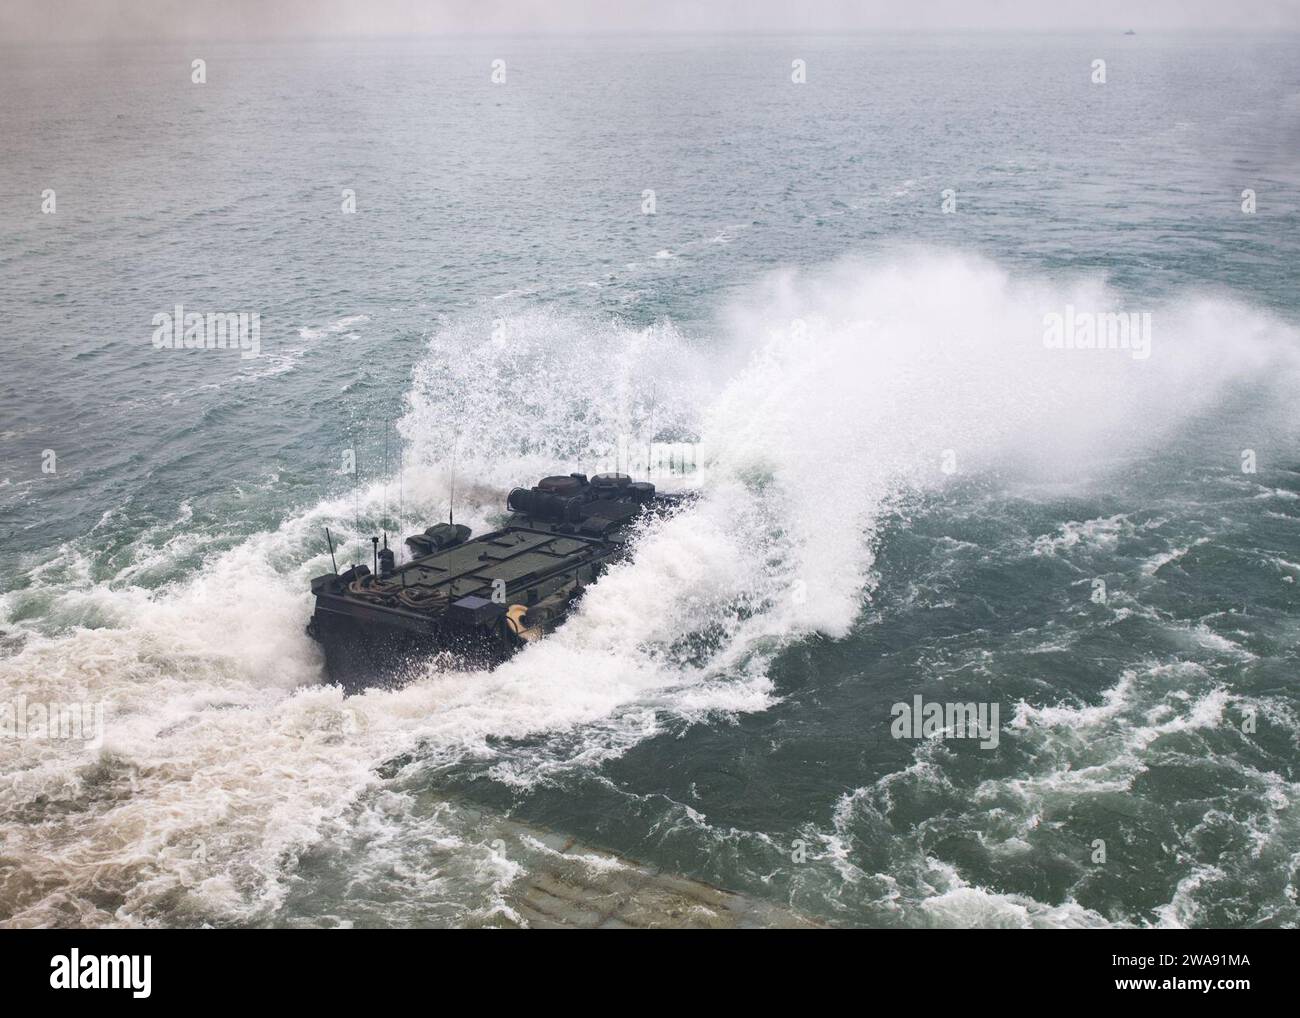 US military forces. 180309PC620-0128 BLACK SEA (March 9, 2018) An AAV-P7/A1 assault amphibious vehicle, attached to the 26th Marine Expeditionary Unit, disembarks the well deck of the Harpers Ferry-class dock landing ship USS Oak Hill (LSD 51), March 9, 2018 during exercise Spring Storm 2018. Spring Storm is a Romanian-led exercise in the Black Sea to enhance amphibious operations and staff interoperability between Romanian and U.S. naval forces. Oak Hill, home-ported in Virginia Beach, Virginia, is conducting naval operations in the U.S. 6th Fleet area of operations. (U.S. Navy photo by Mass Stock Photo